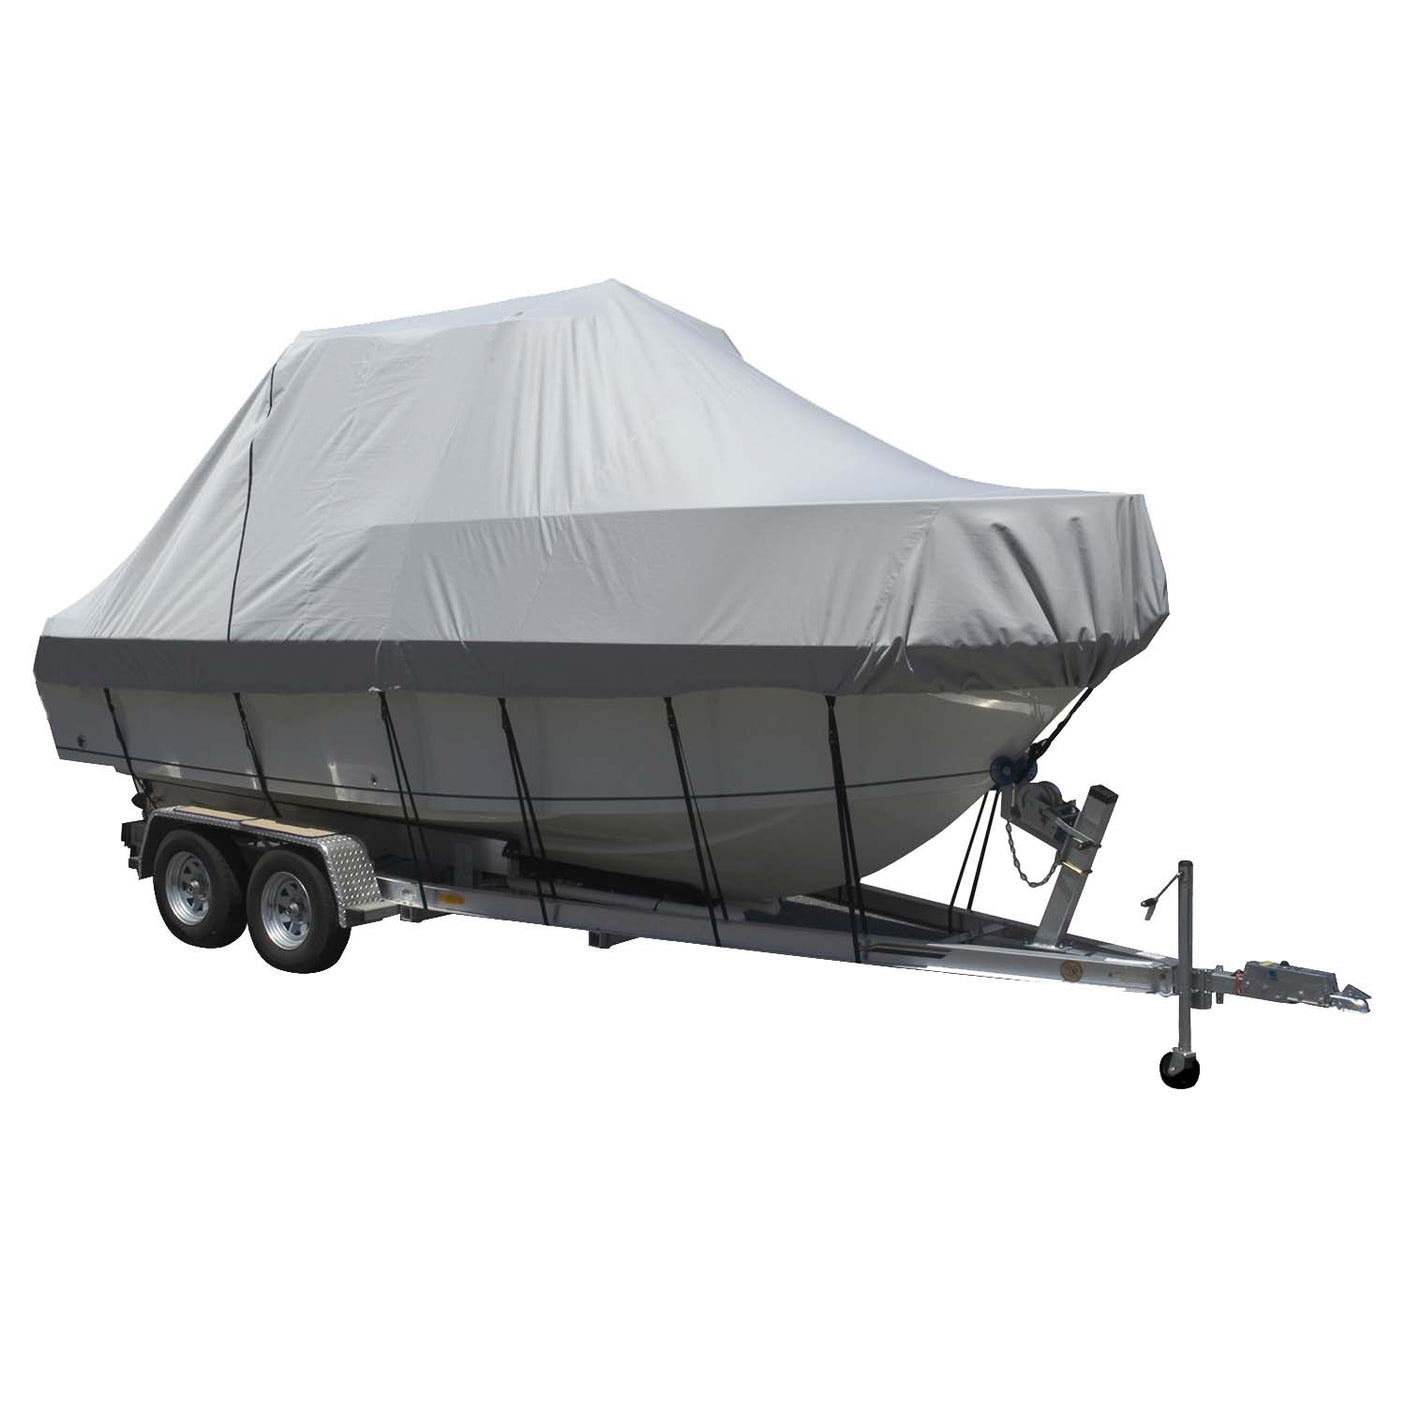 Carver Sun-DURA Specialty Boat Cover f/19.5 Walk Around Cuddy Center Console Boats - Grey - Life Raft Professionals